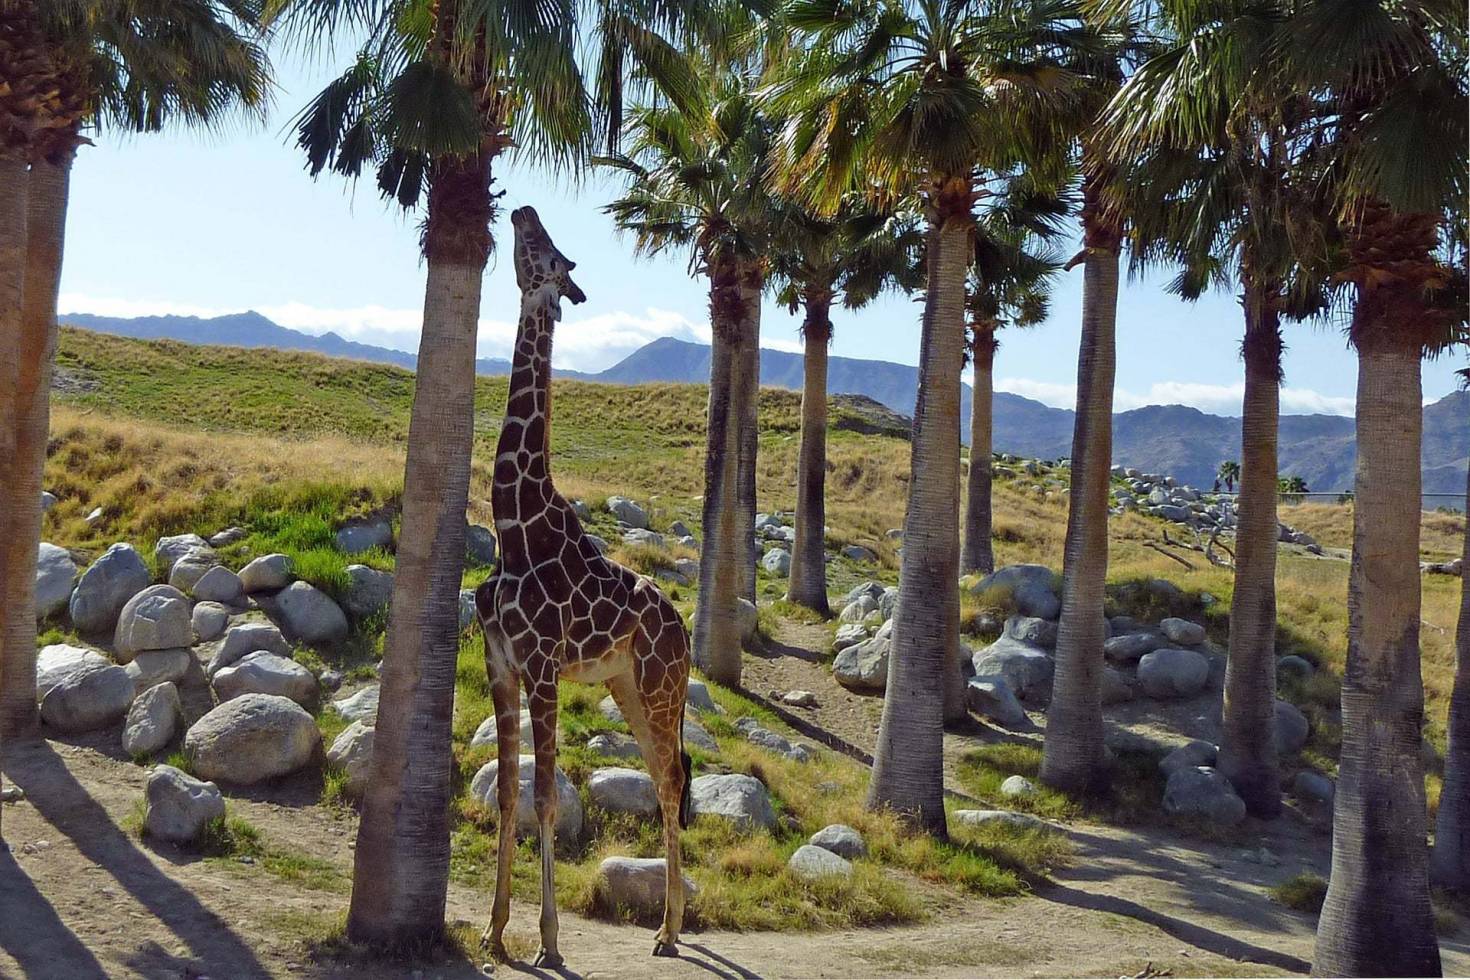 The Living Desert Zoo and Gardens State Park